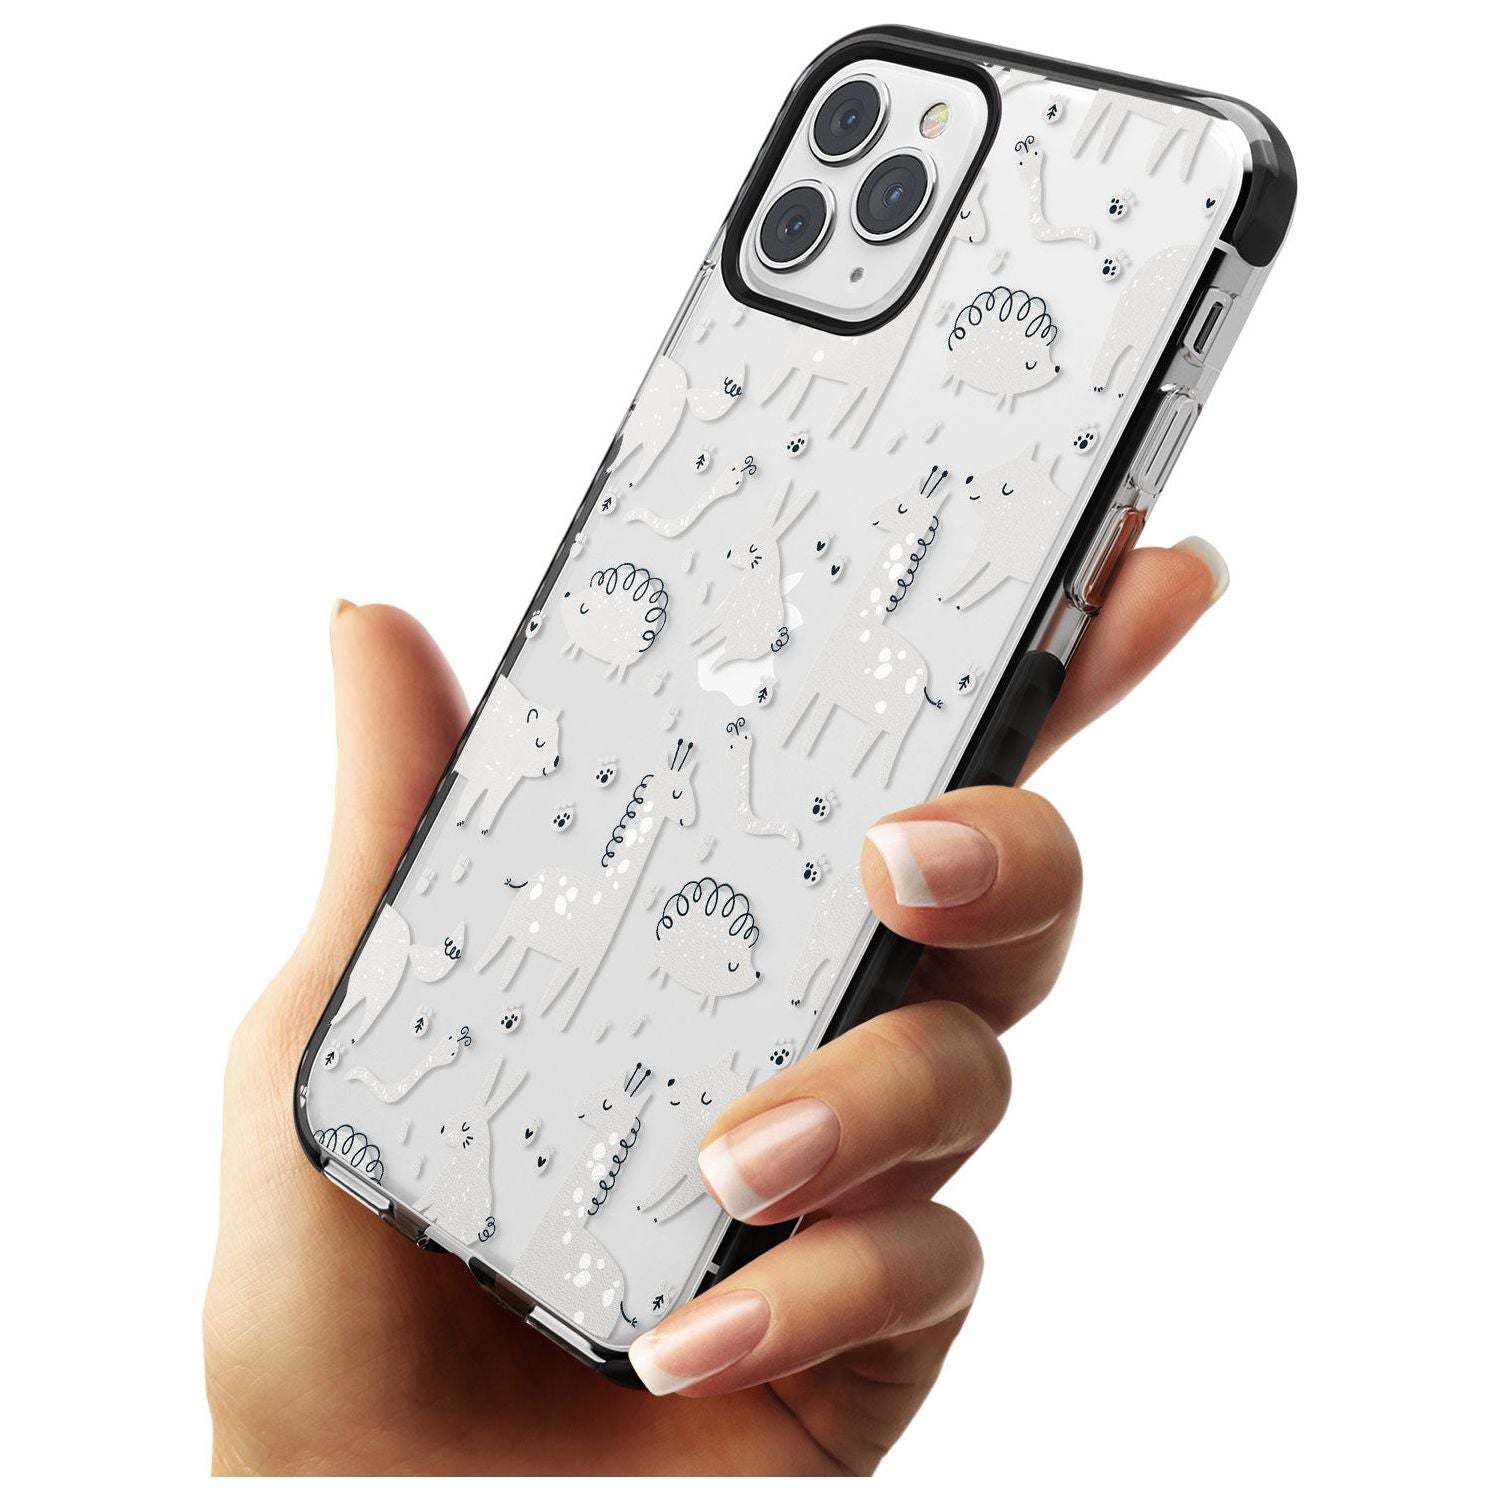 Adorable Mixed Animals Pattern (Clear) Black Impact Phone Case for iPhone 11 Pro Max